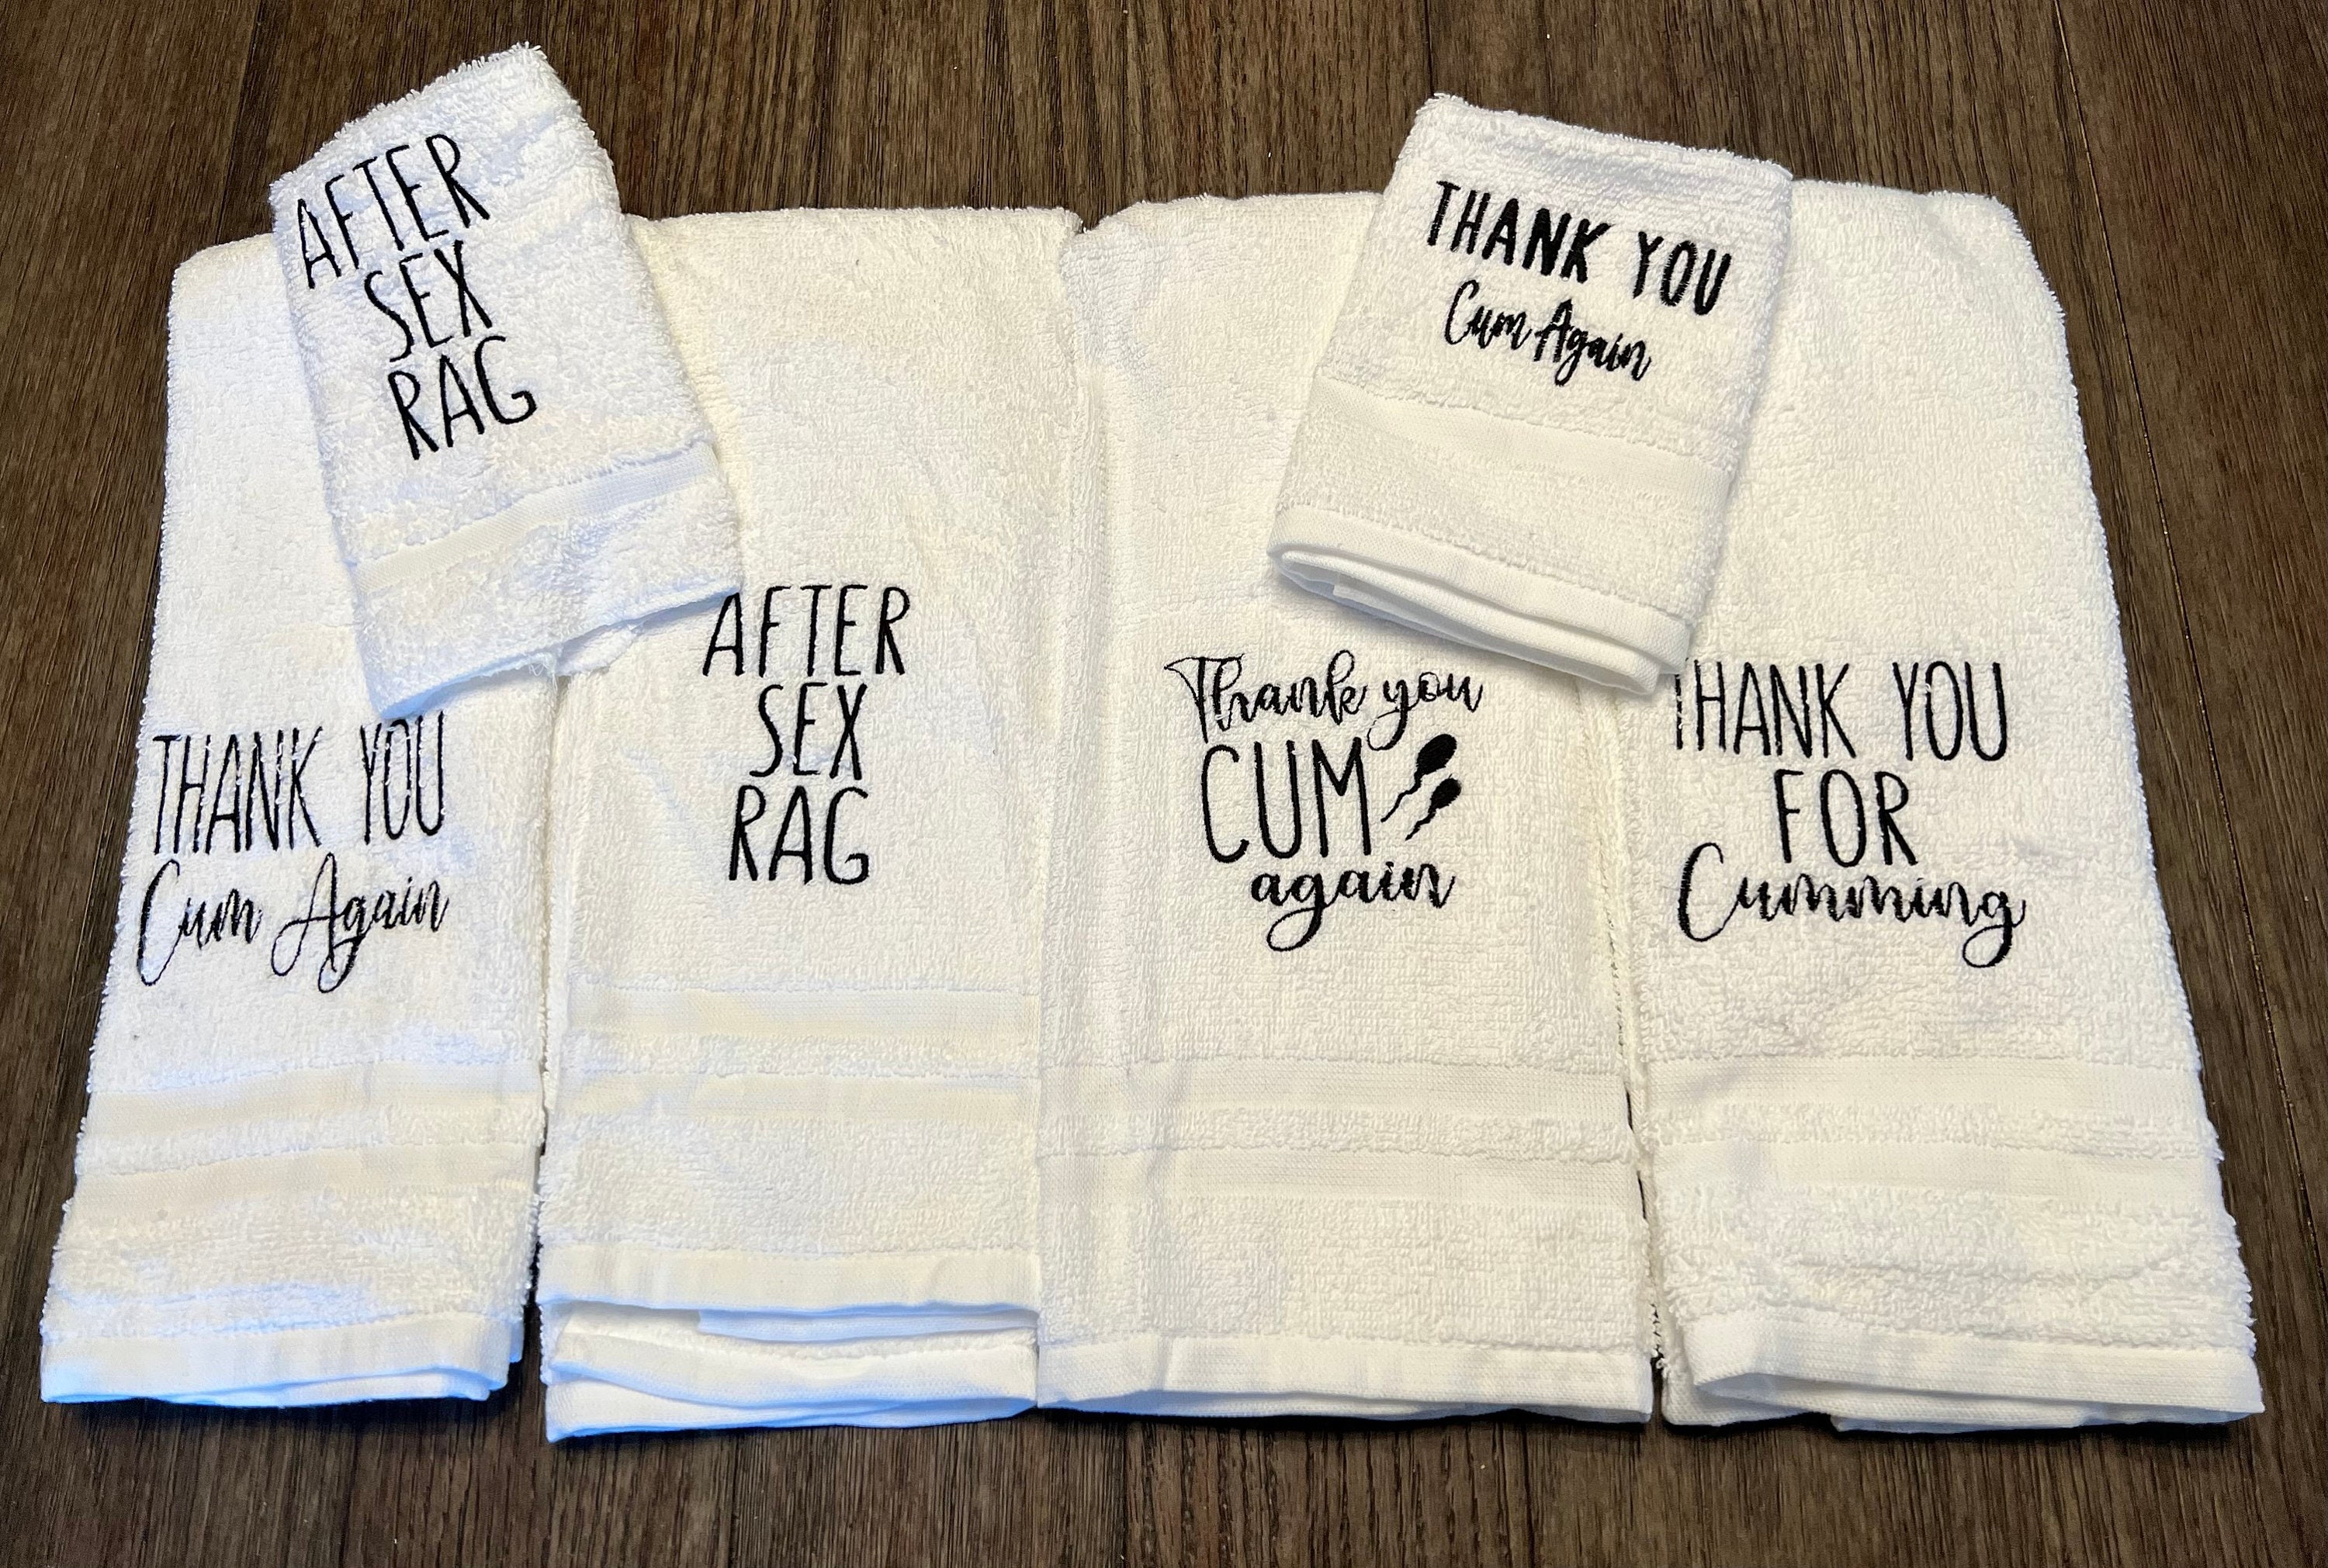 Thank You Cm Again Wash Rag Cm Towel Anniversary Gift, Gift for